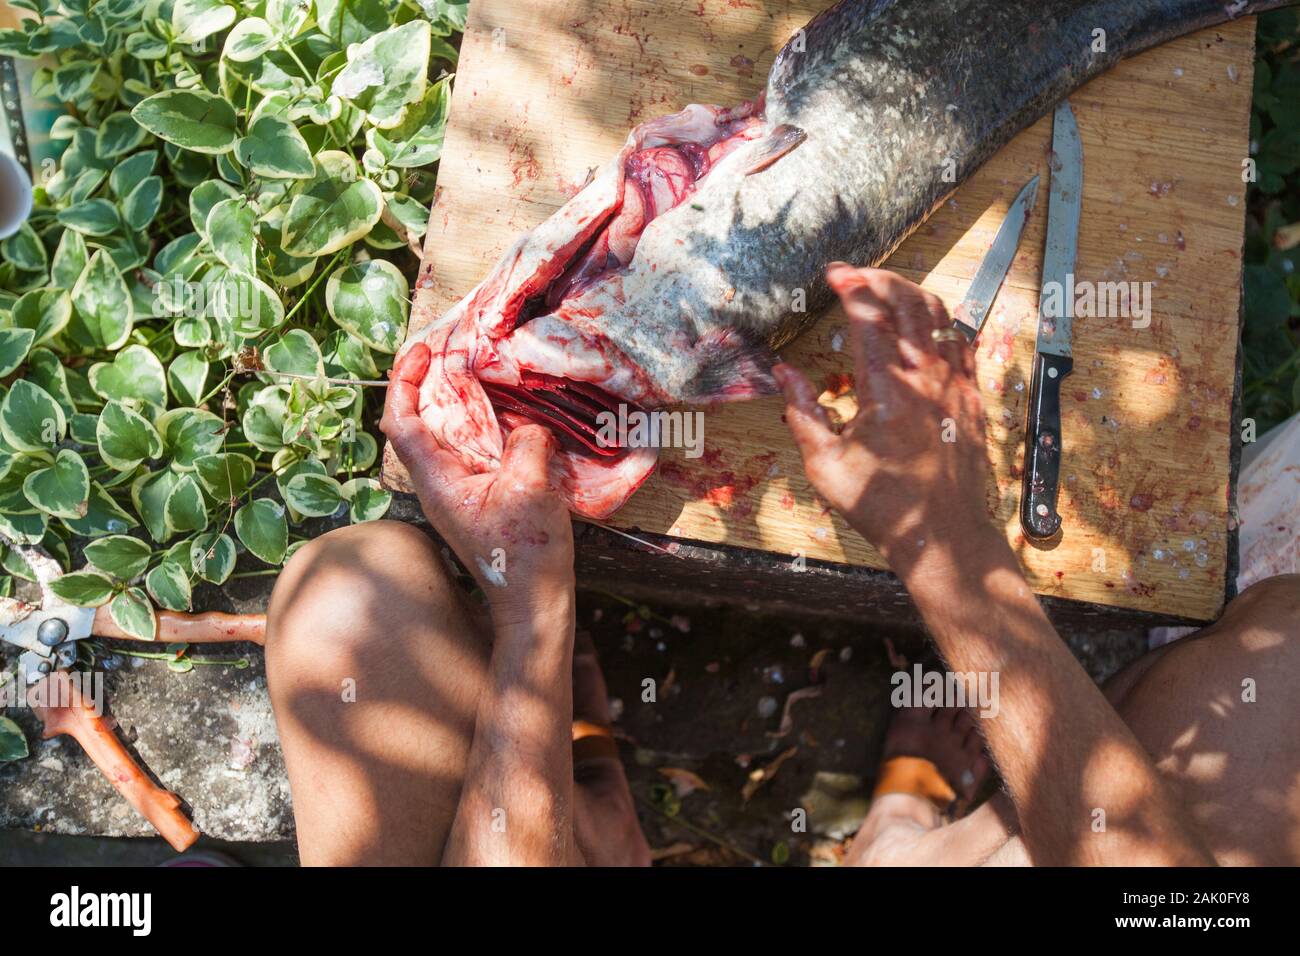 Unrecognizable Fisherman with knife cleaning freshwater fish on wooden board outdoor. Preparing raw food. Stock Photo